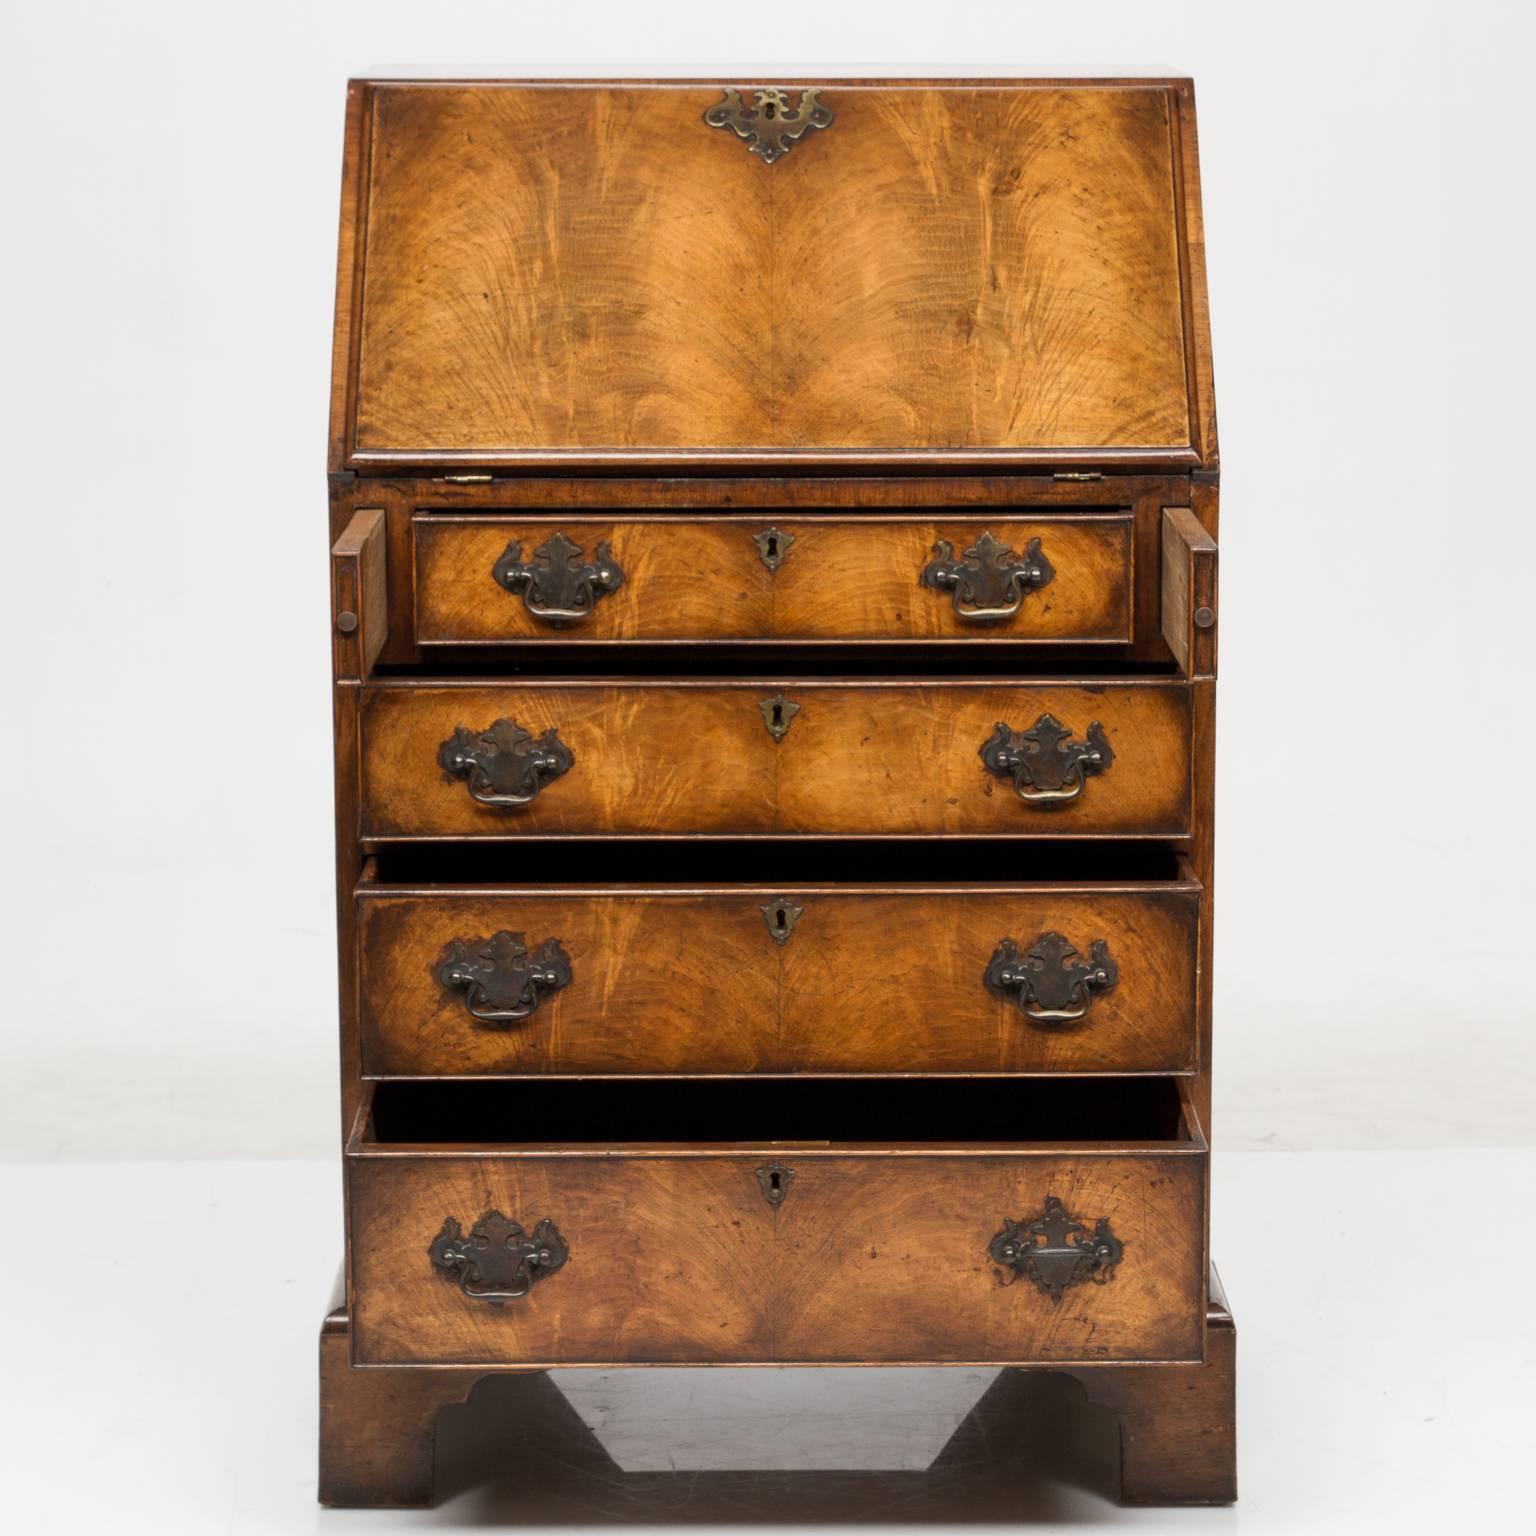 A very Queen Anne walnut slant front bureau on bracket feet. This is a versatile piece and functional size. Beautiful coloring and shading. Nice brass pulls. There is a slant front which open to reveal a fitted interior and a tooled leather inserted